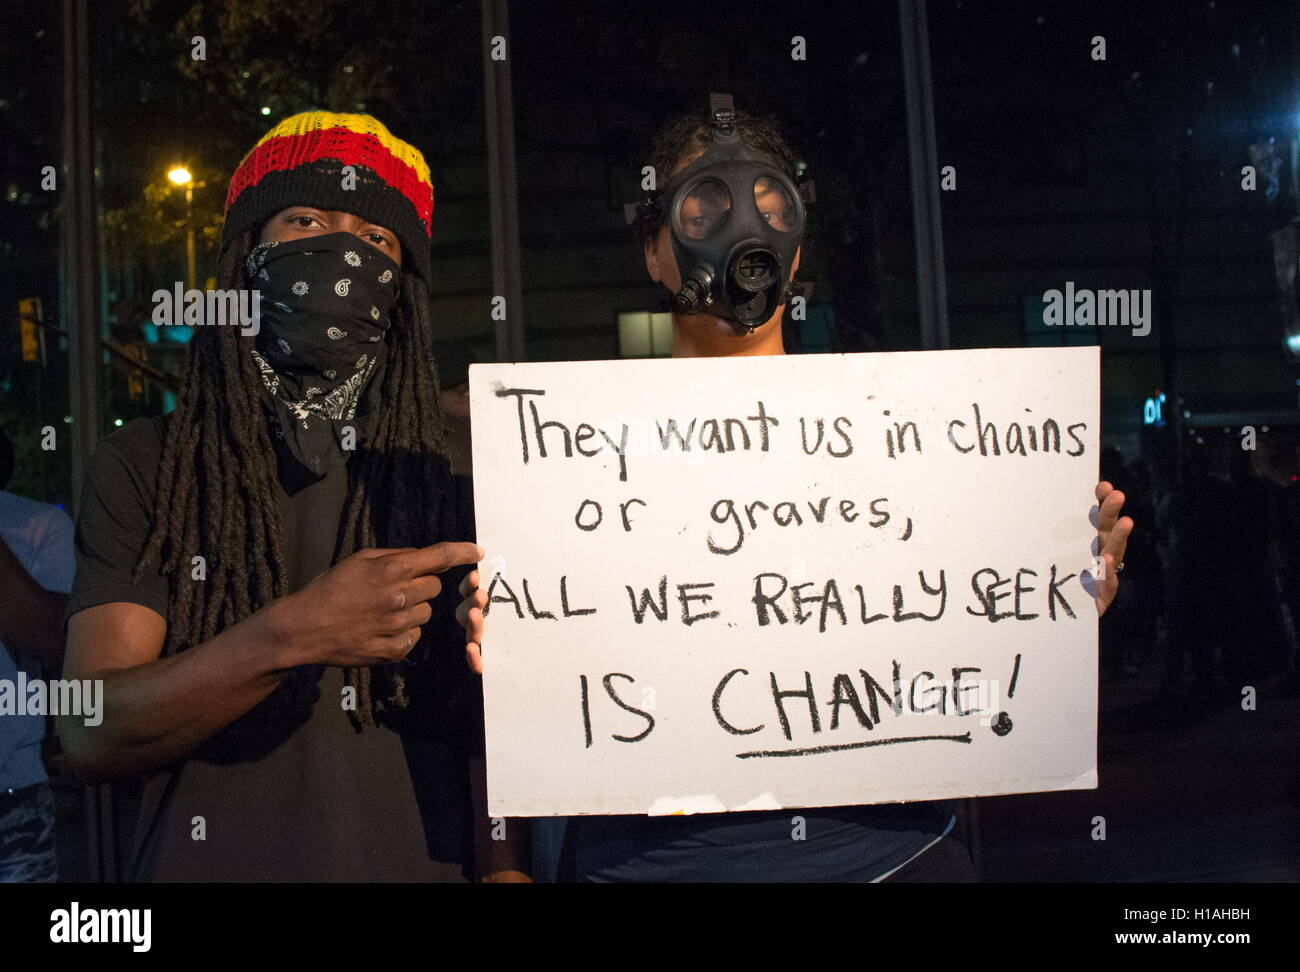 Charlotte, North Carolina, USA. 22nd Sep, 2016. Protests continued for the third in Charlotte, over the death of Keith Lamont Scott by a police officer on Tuesday. On Thursday protest was most of the time peaceful beacause of the heavy presence of police officers and members of the National Guard. Credit:  Dimitrios Manis/ZUMA Wire/ZUMAPRESS.com/Alamy Live News Stock Photo